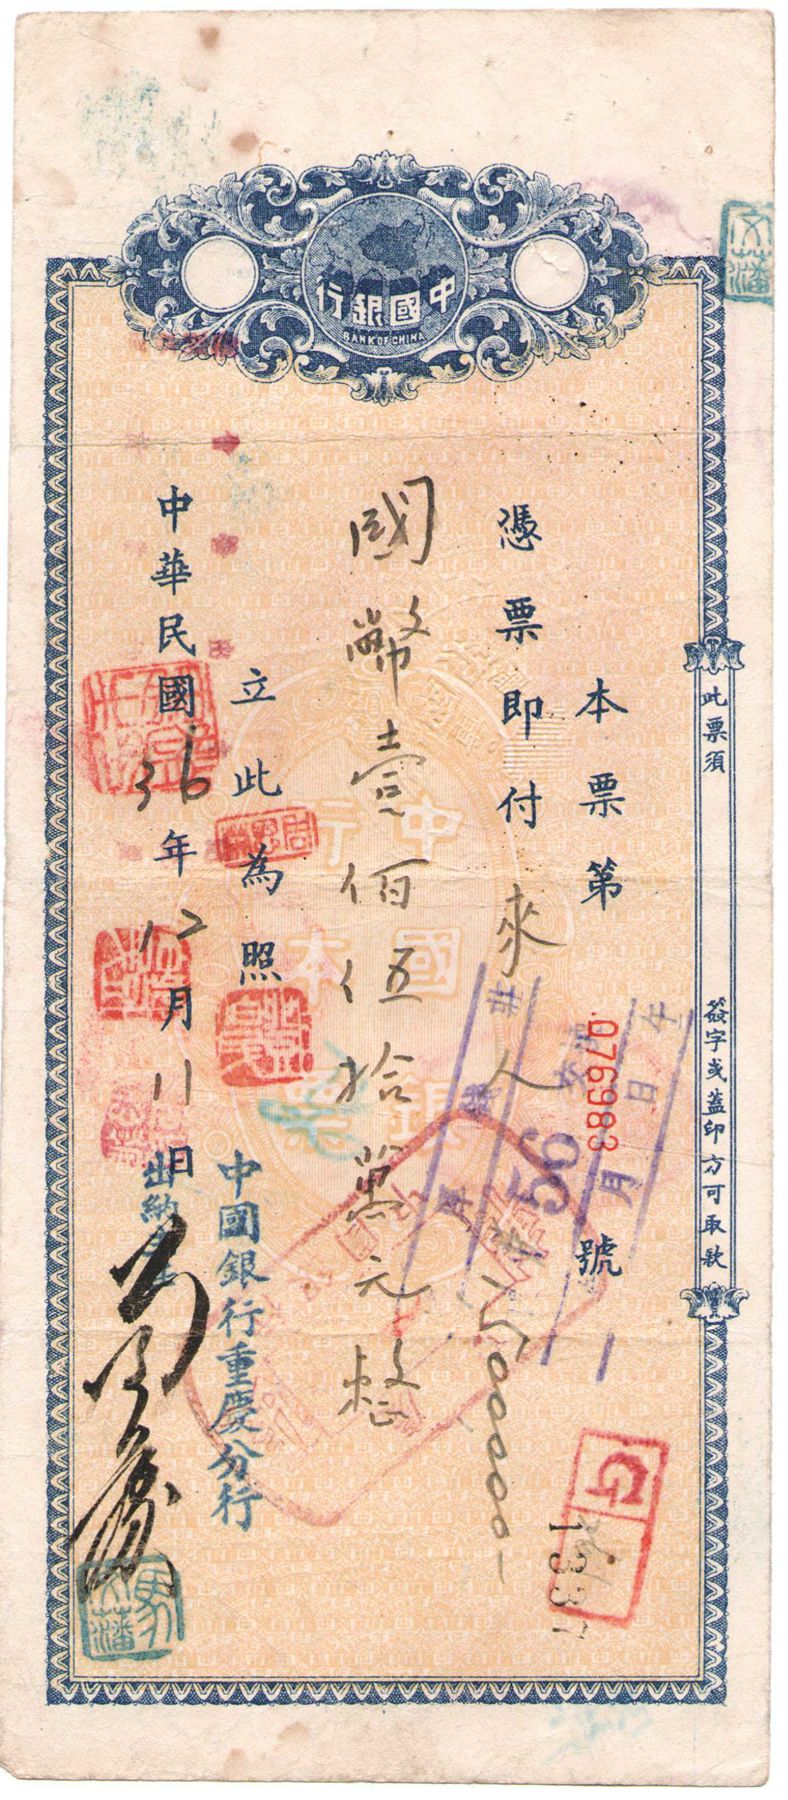 D3130, Bank of China, Cash Promissory Note 1,500,000 Dollars, 1947